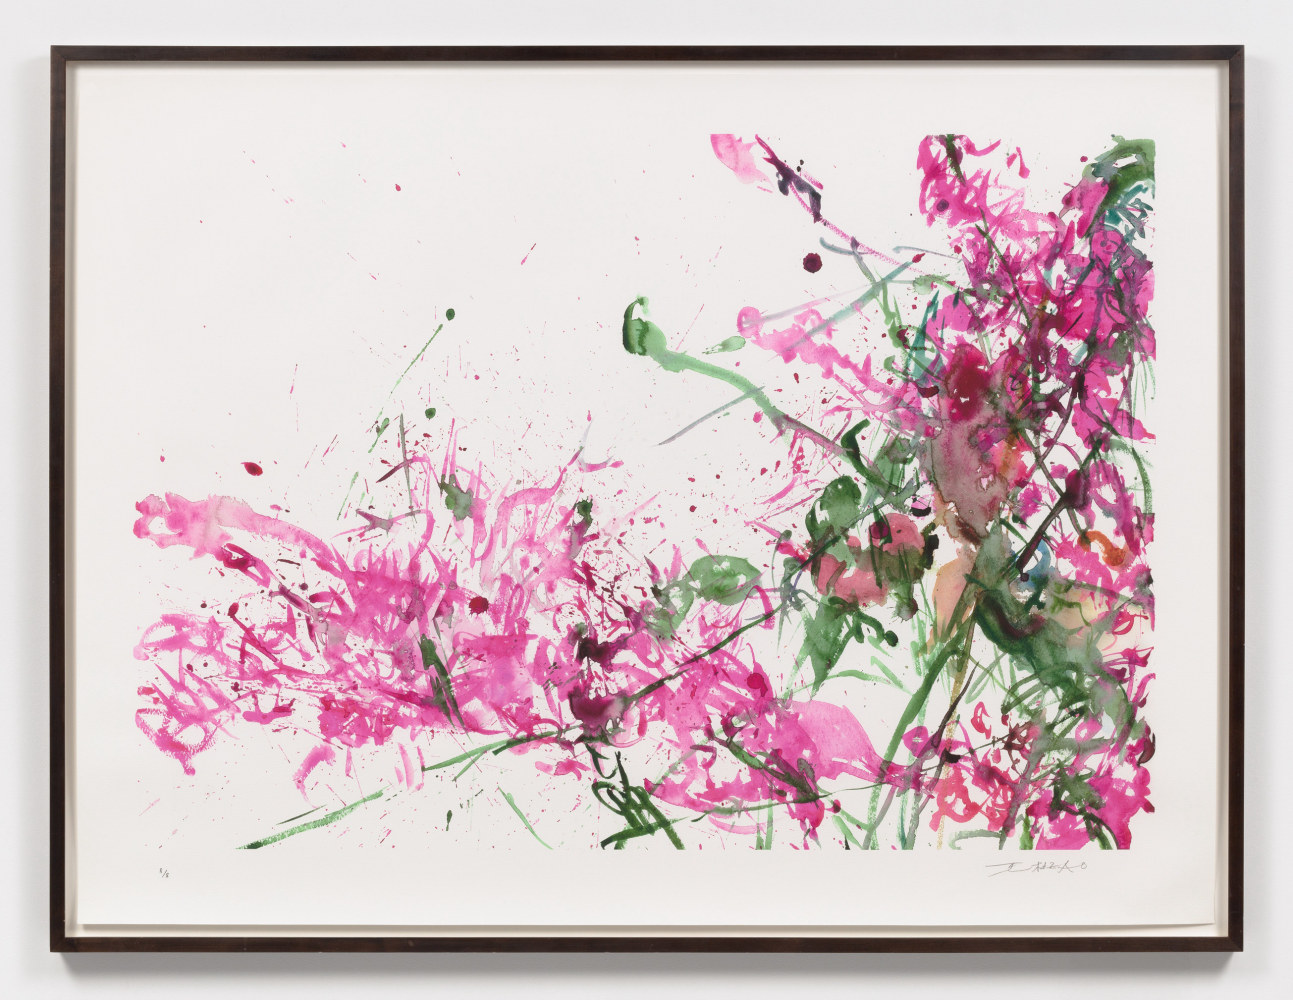 A colorful, movement filled serigraph by Zao Wou-Ki in pink and green on white paper